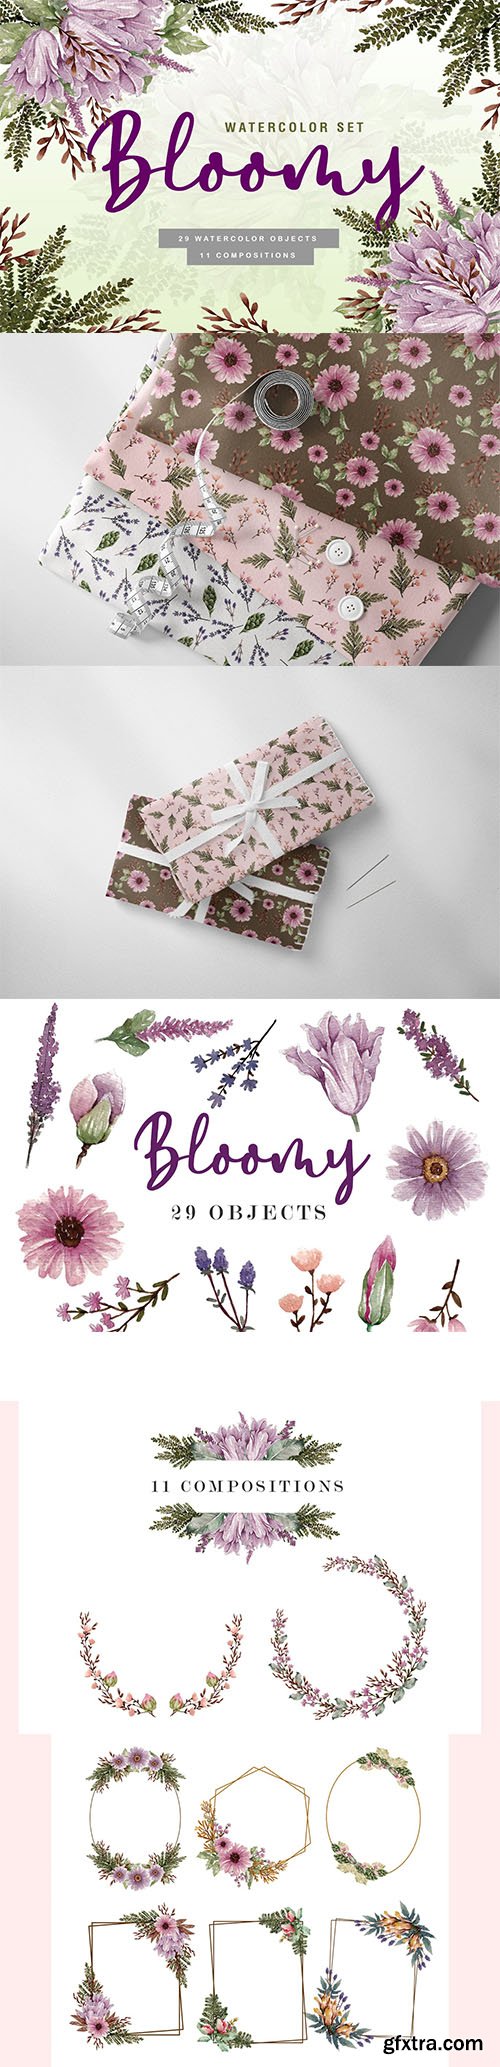 Bloomy - Watercolor Collection